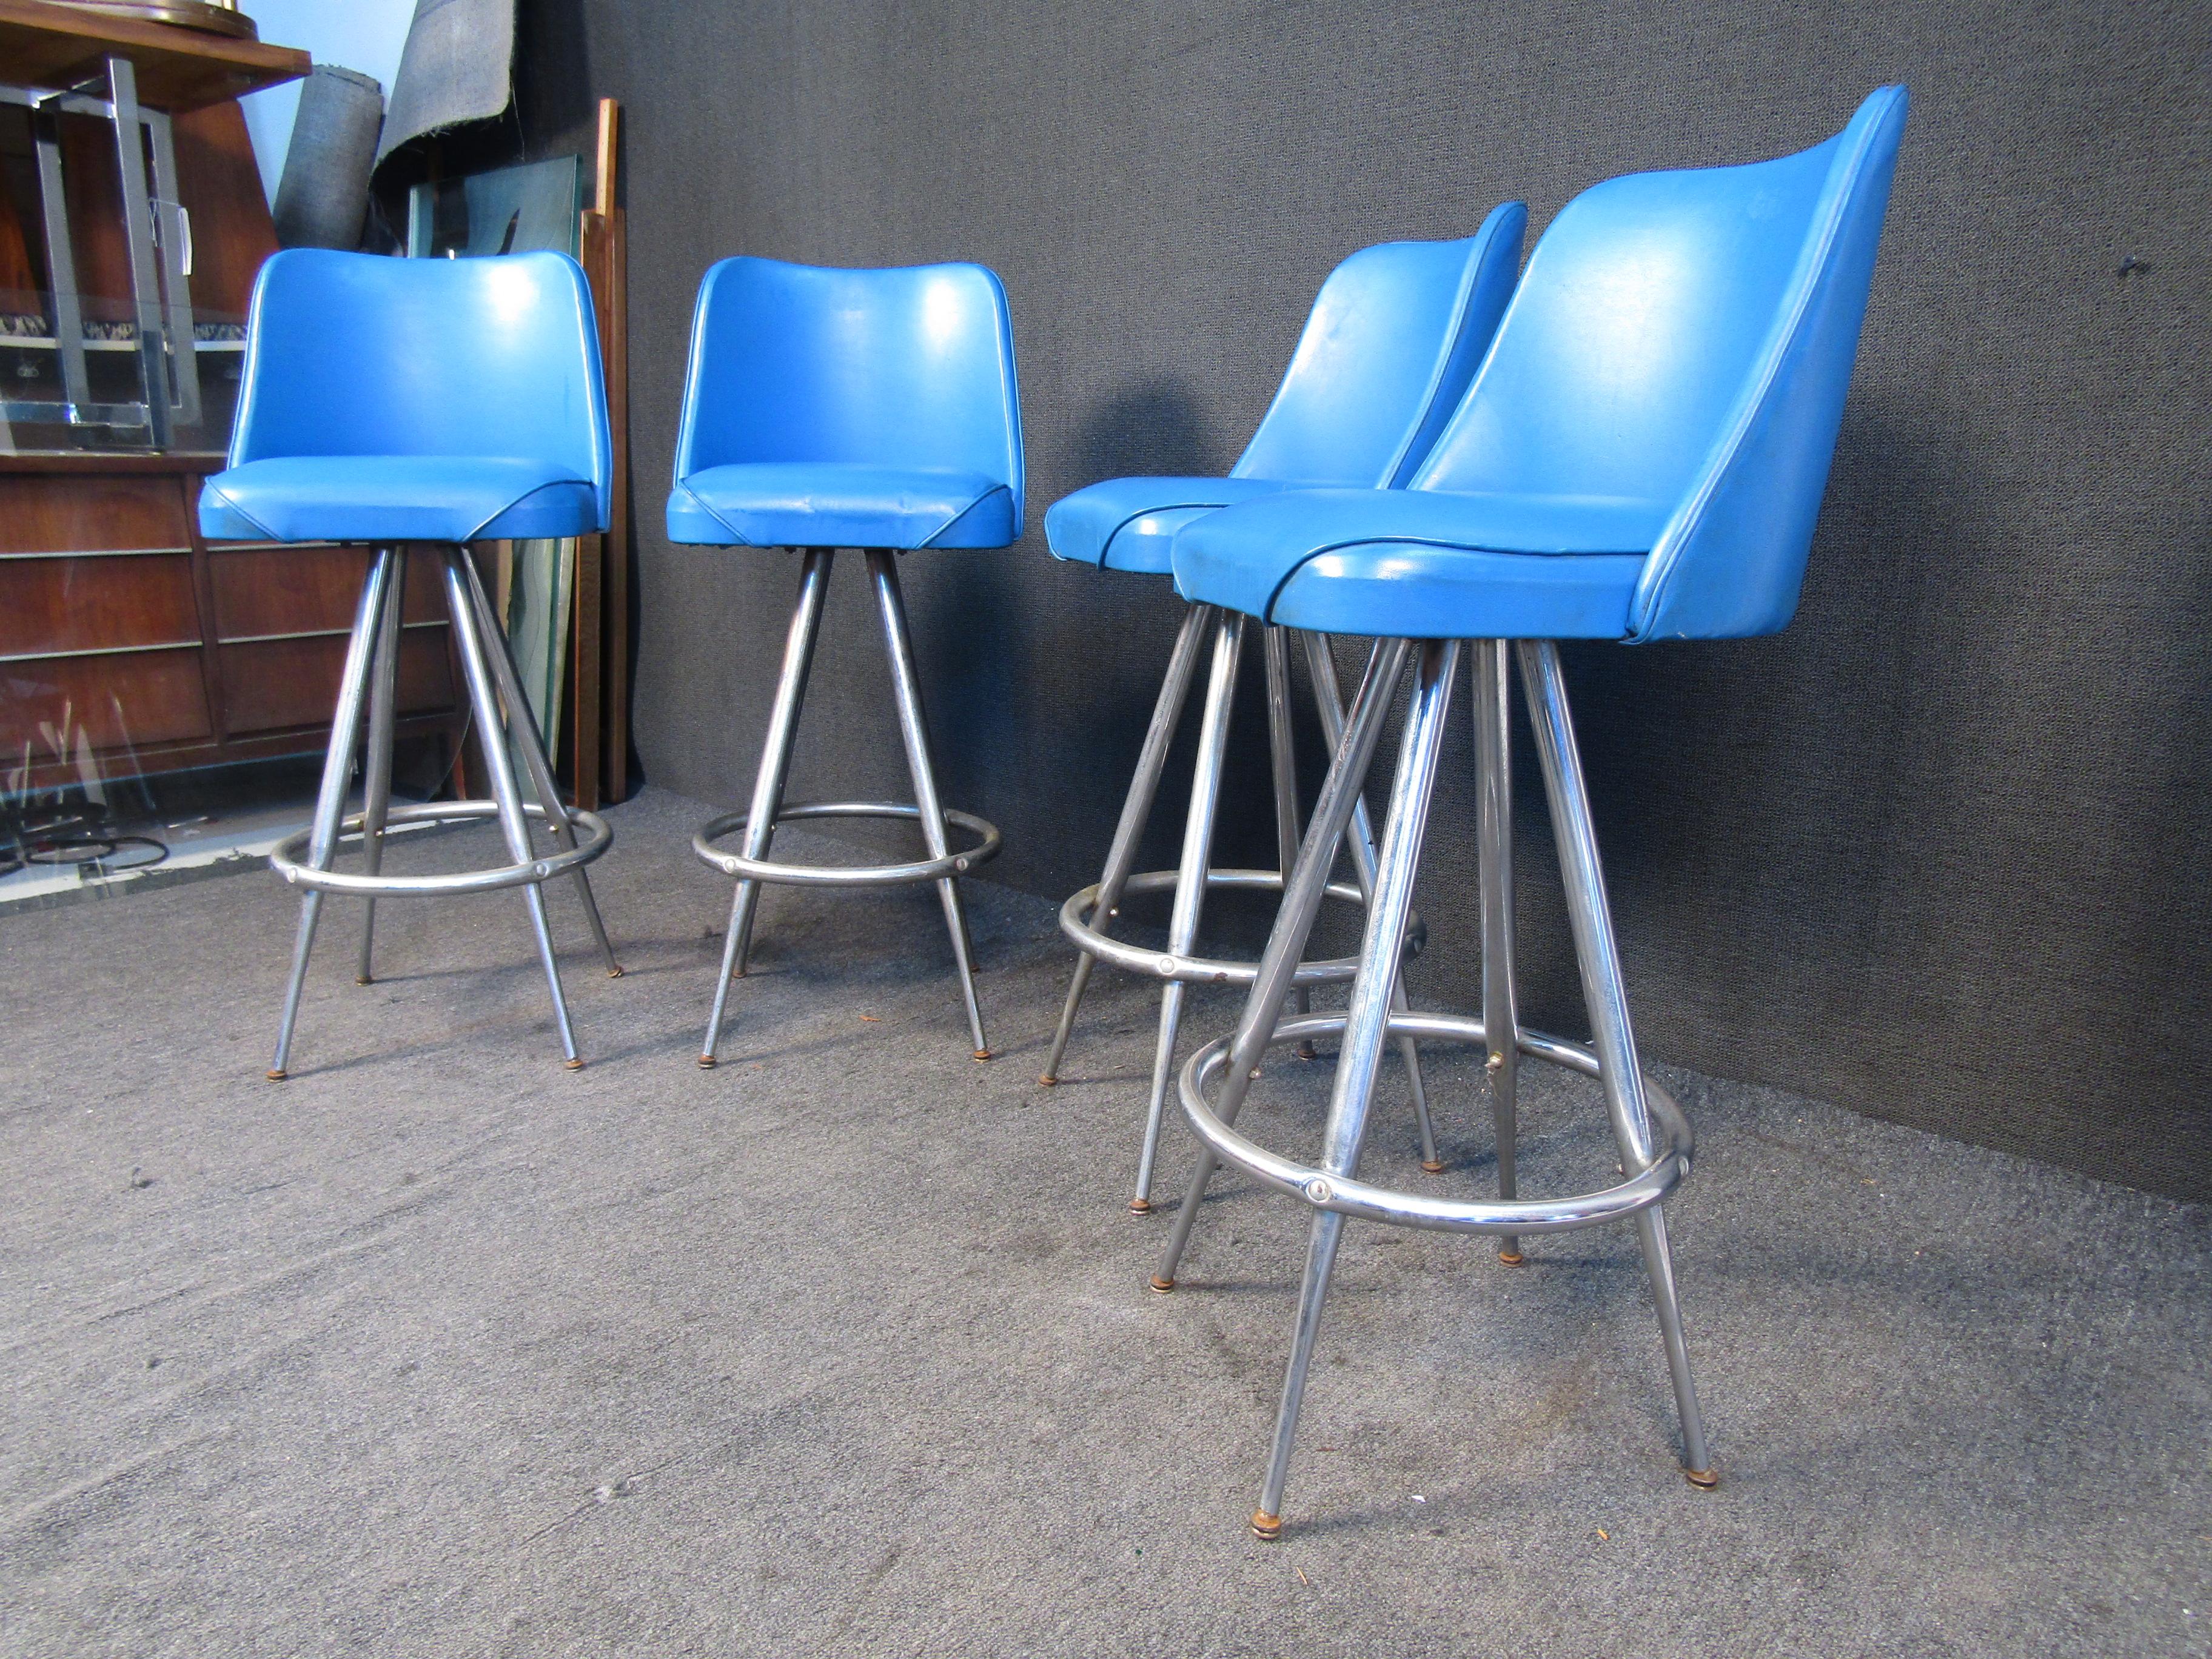 This vintage set of bar stools can brighten up any space through their bright blue upholstery. Metal bases add a crafted and sturdy Mid-Century quality to the stools. Please confirm item location with seller (NY/NJ).